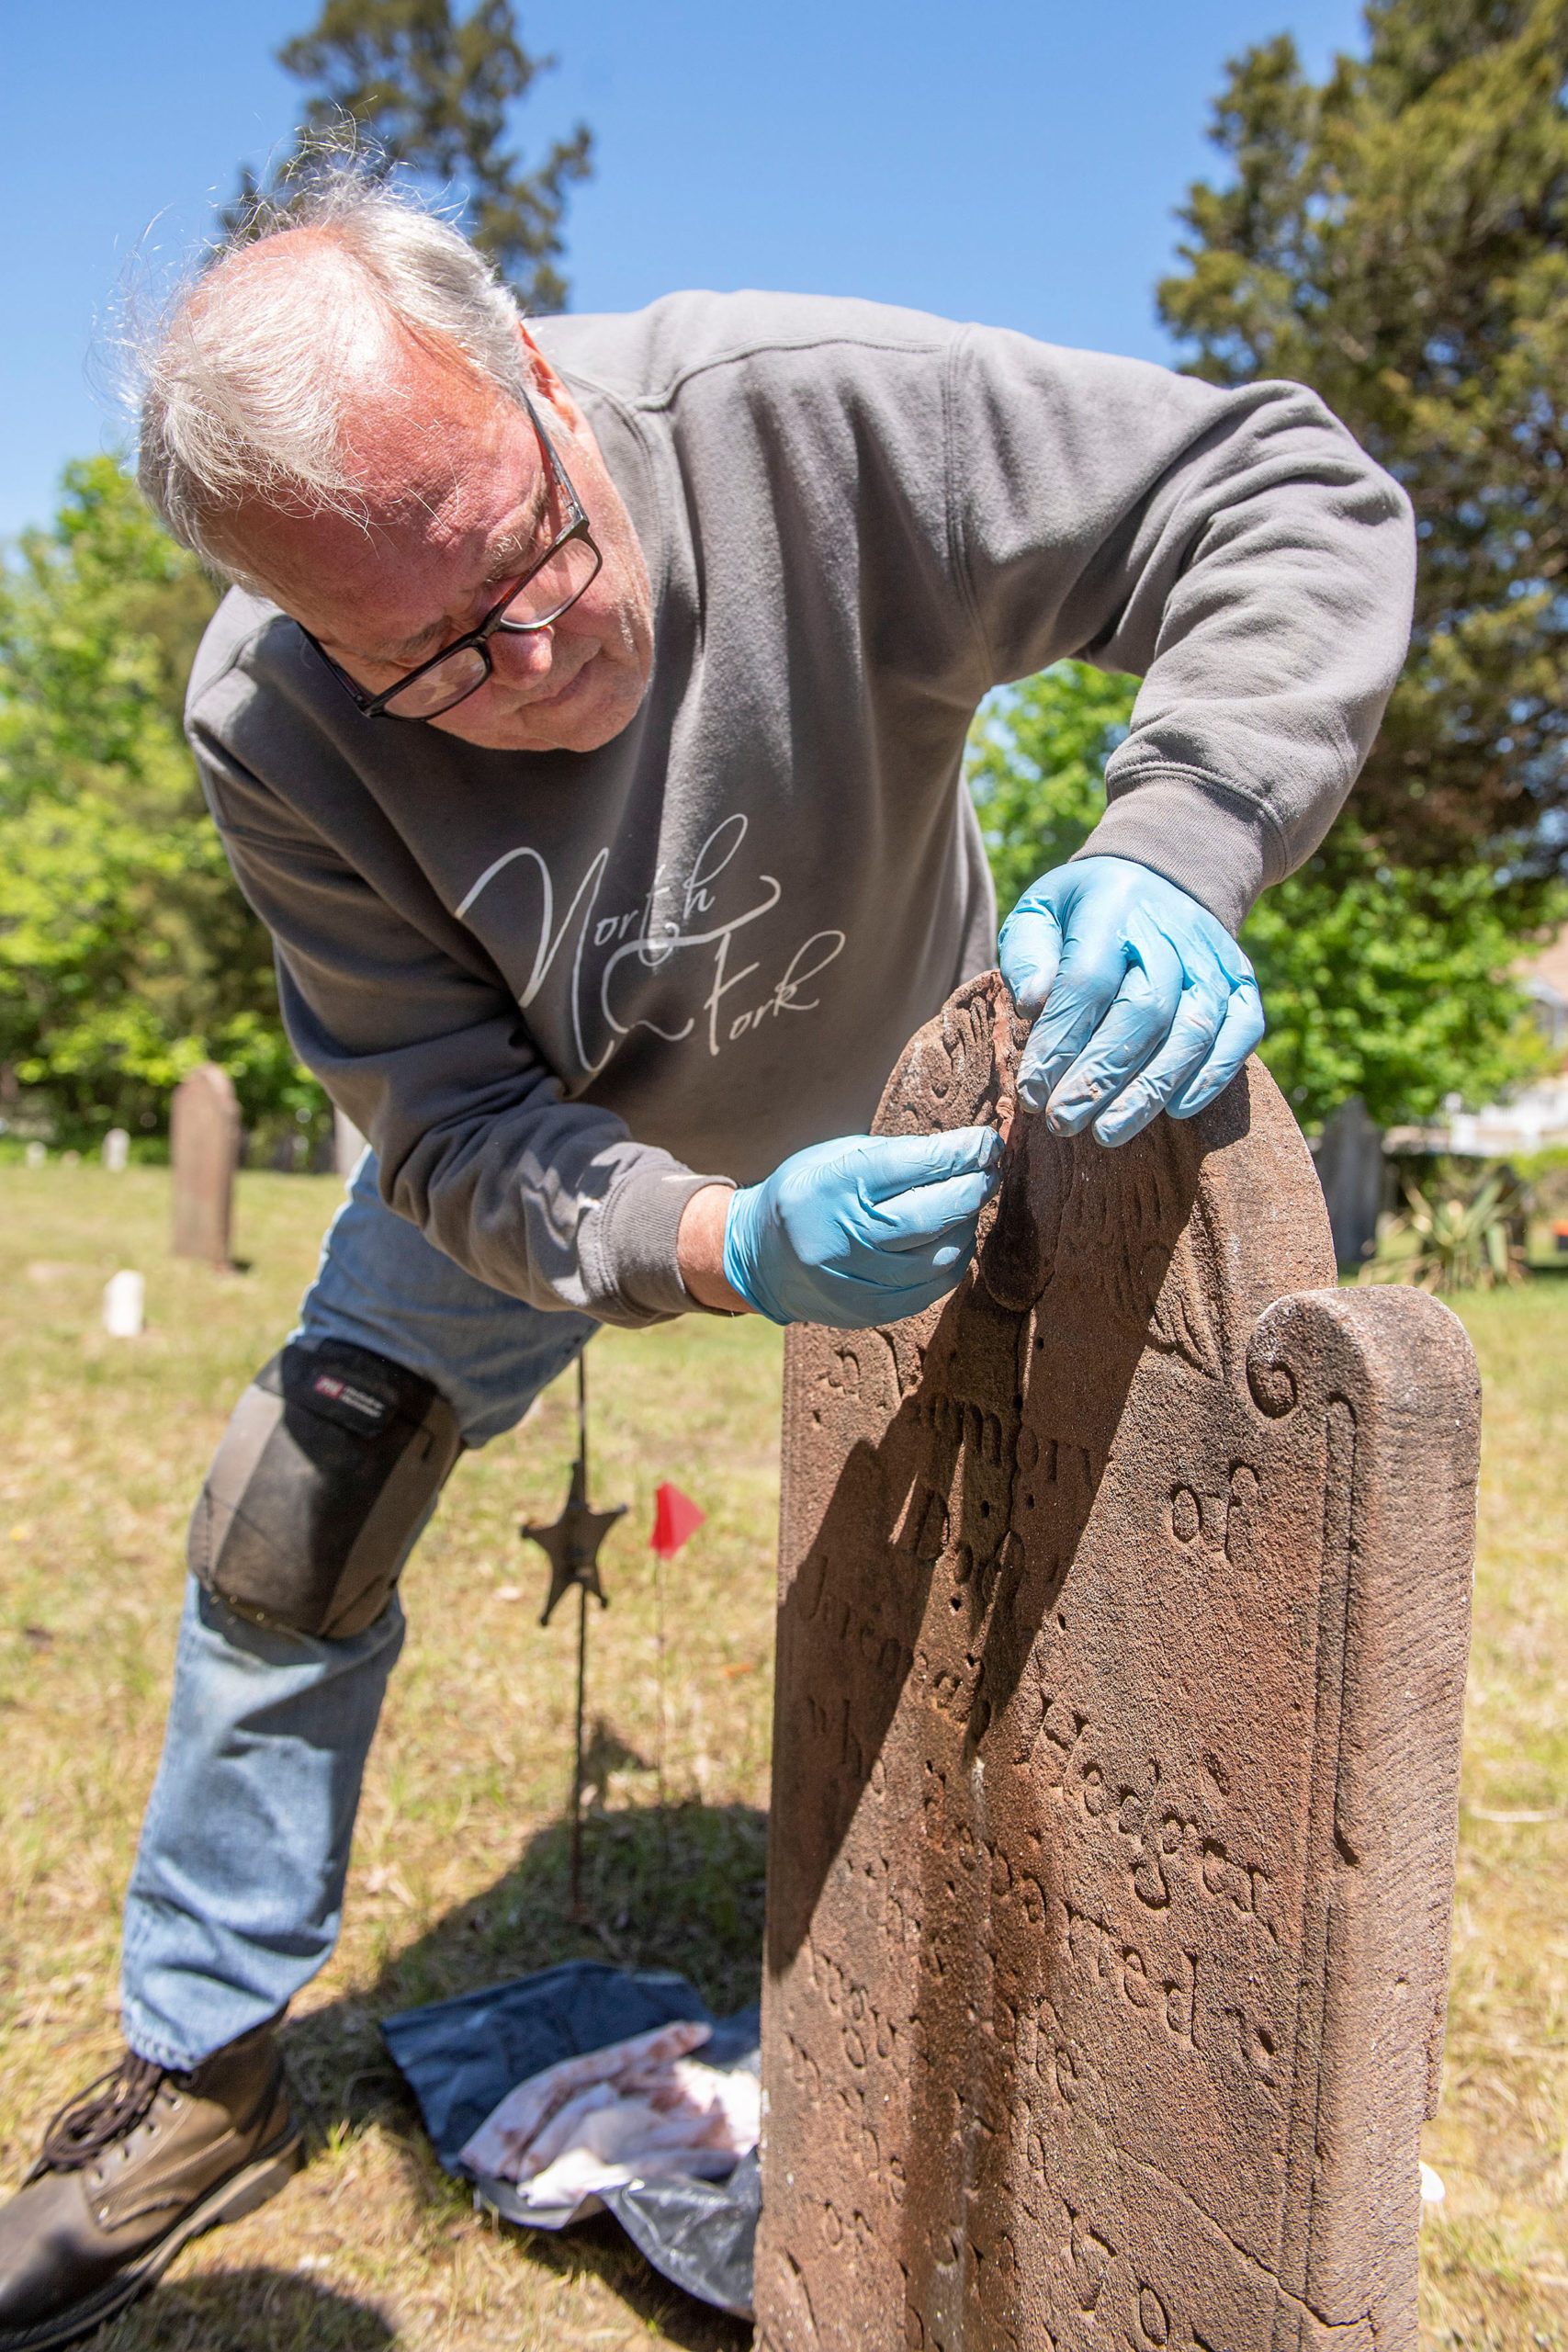 Burying Ground Preservation Group Partner Zach Studenroth applies a grout compound onto a brownstone headstone during the early stages of the renovation and preservation process taking place at the Old Burying Ground adjacent to the Sag Harbor Old Whalers Church on May 11.    MICHAEL HELLER